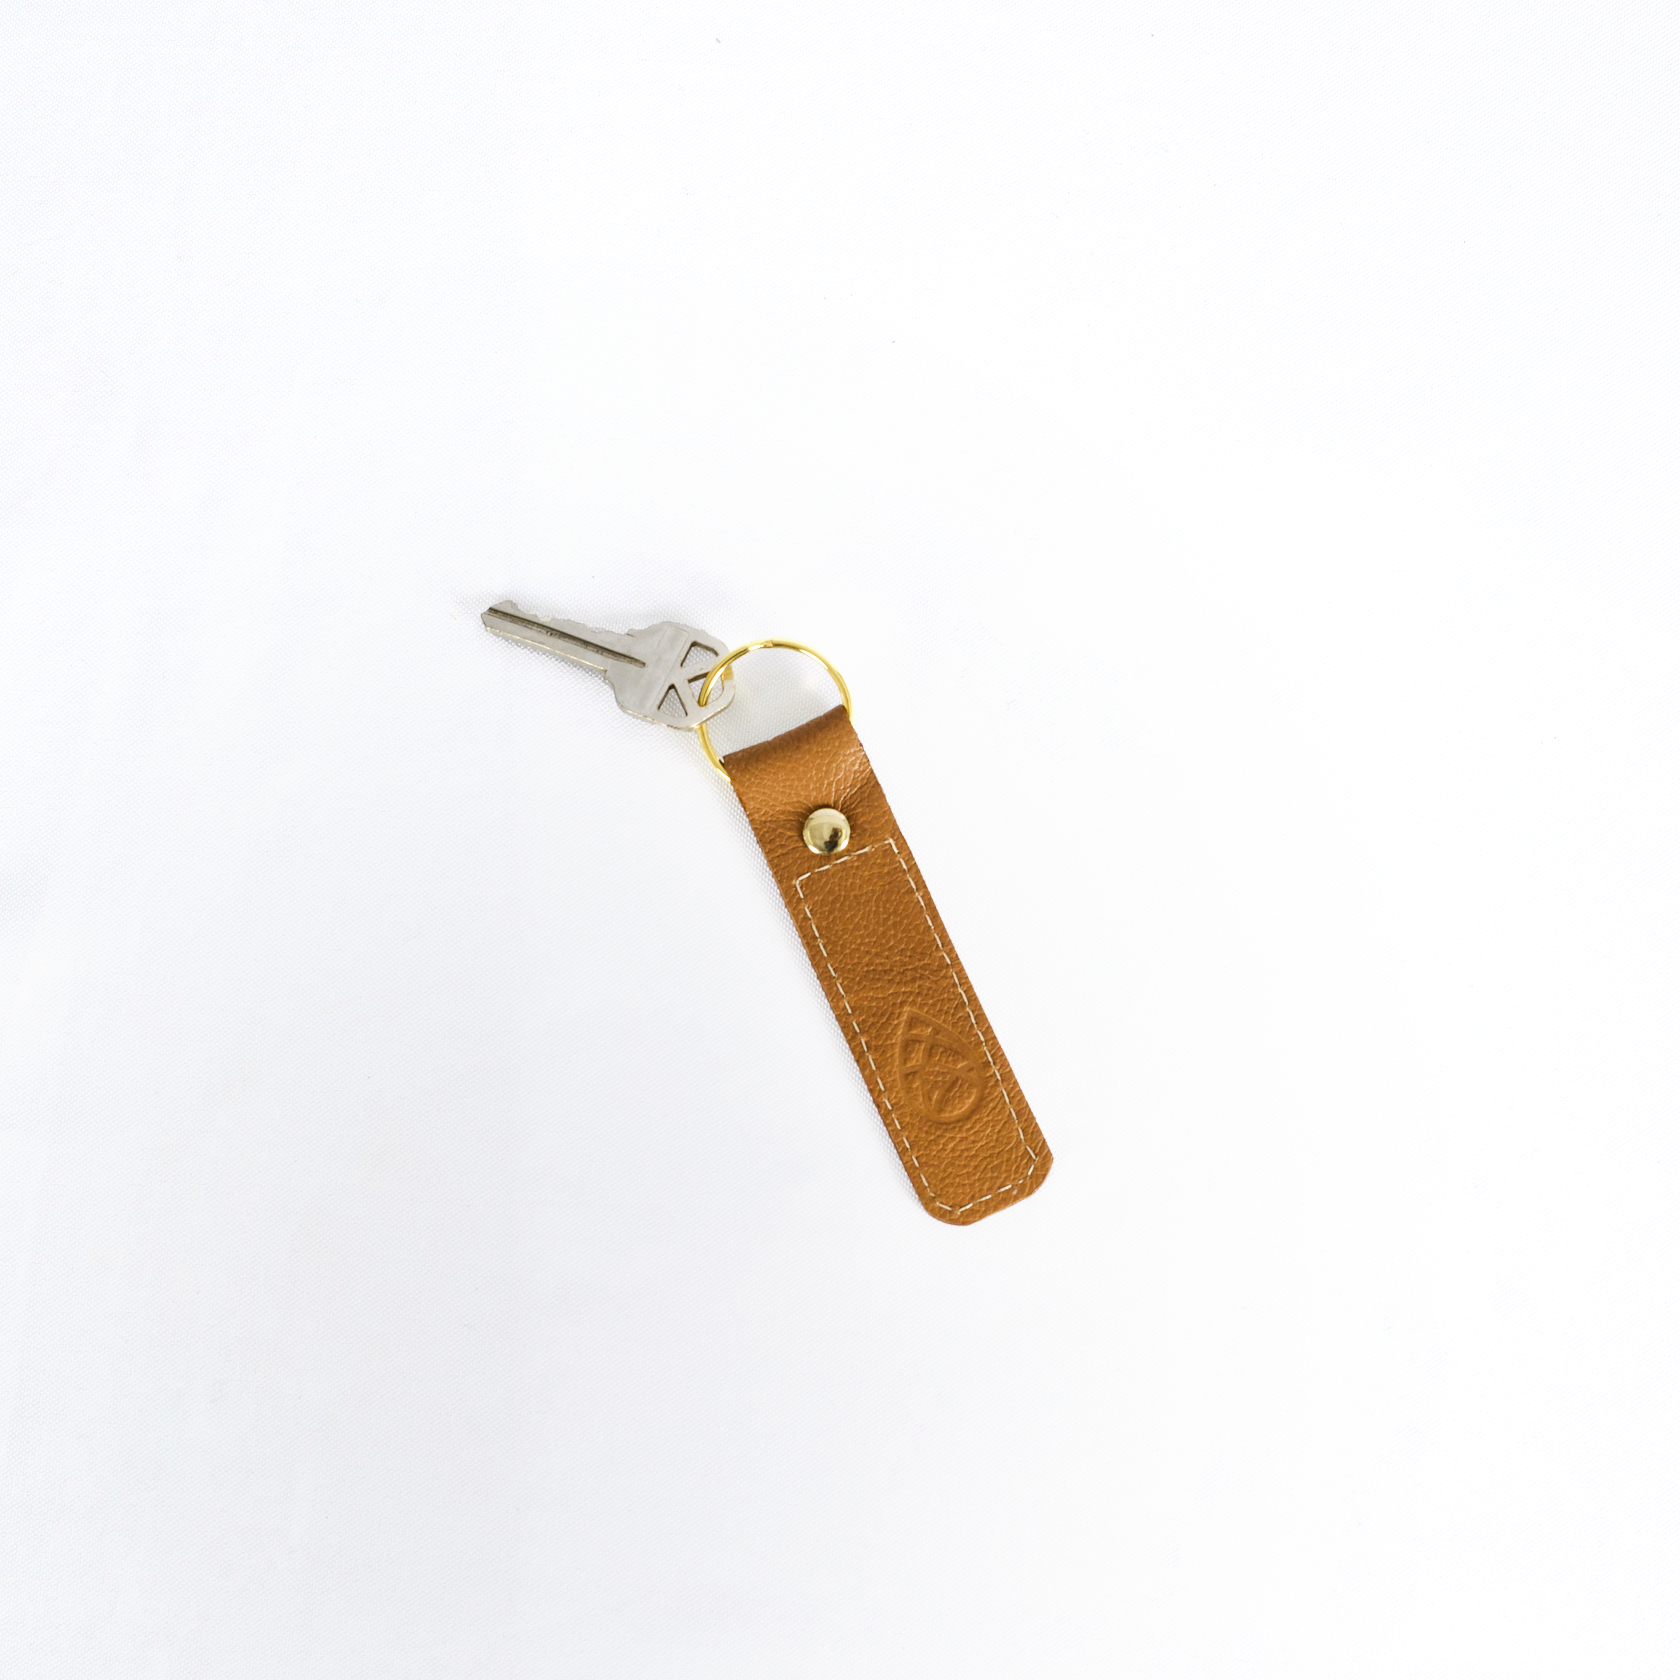 Keychain from Southwest Airlines Leather